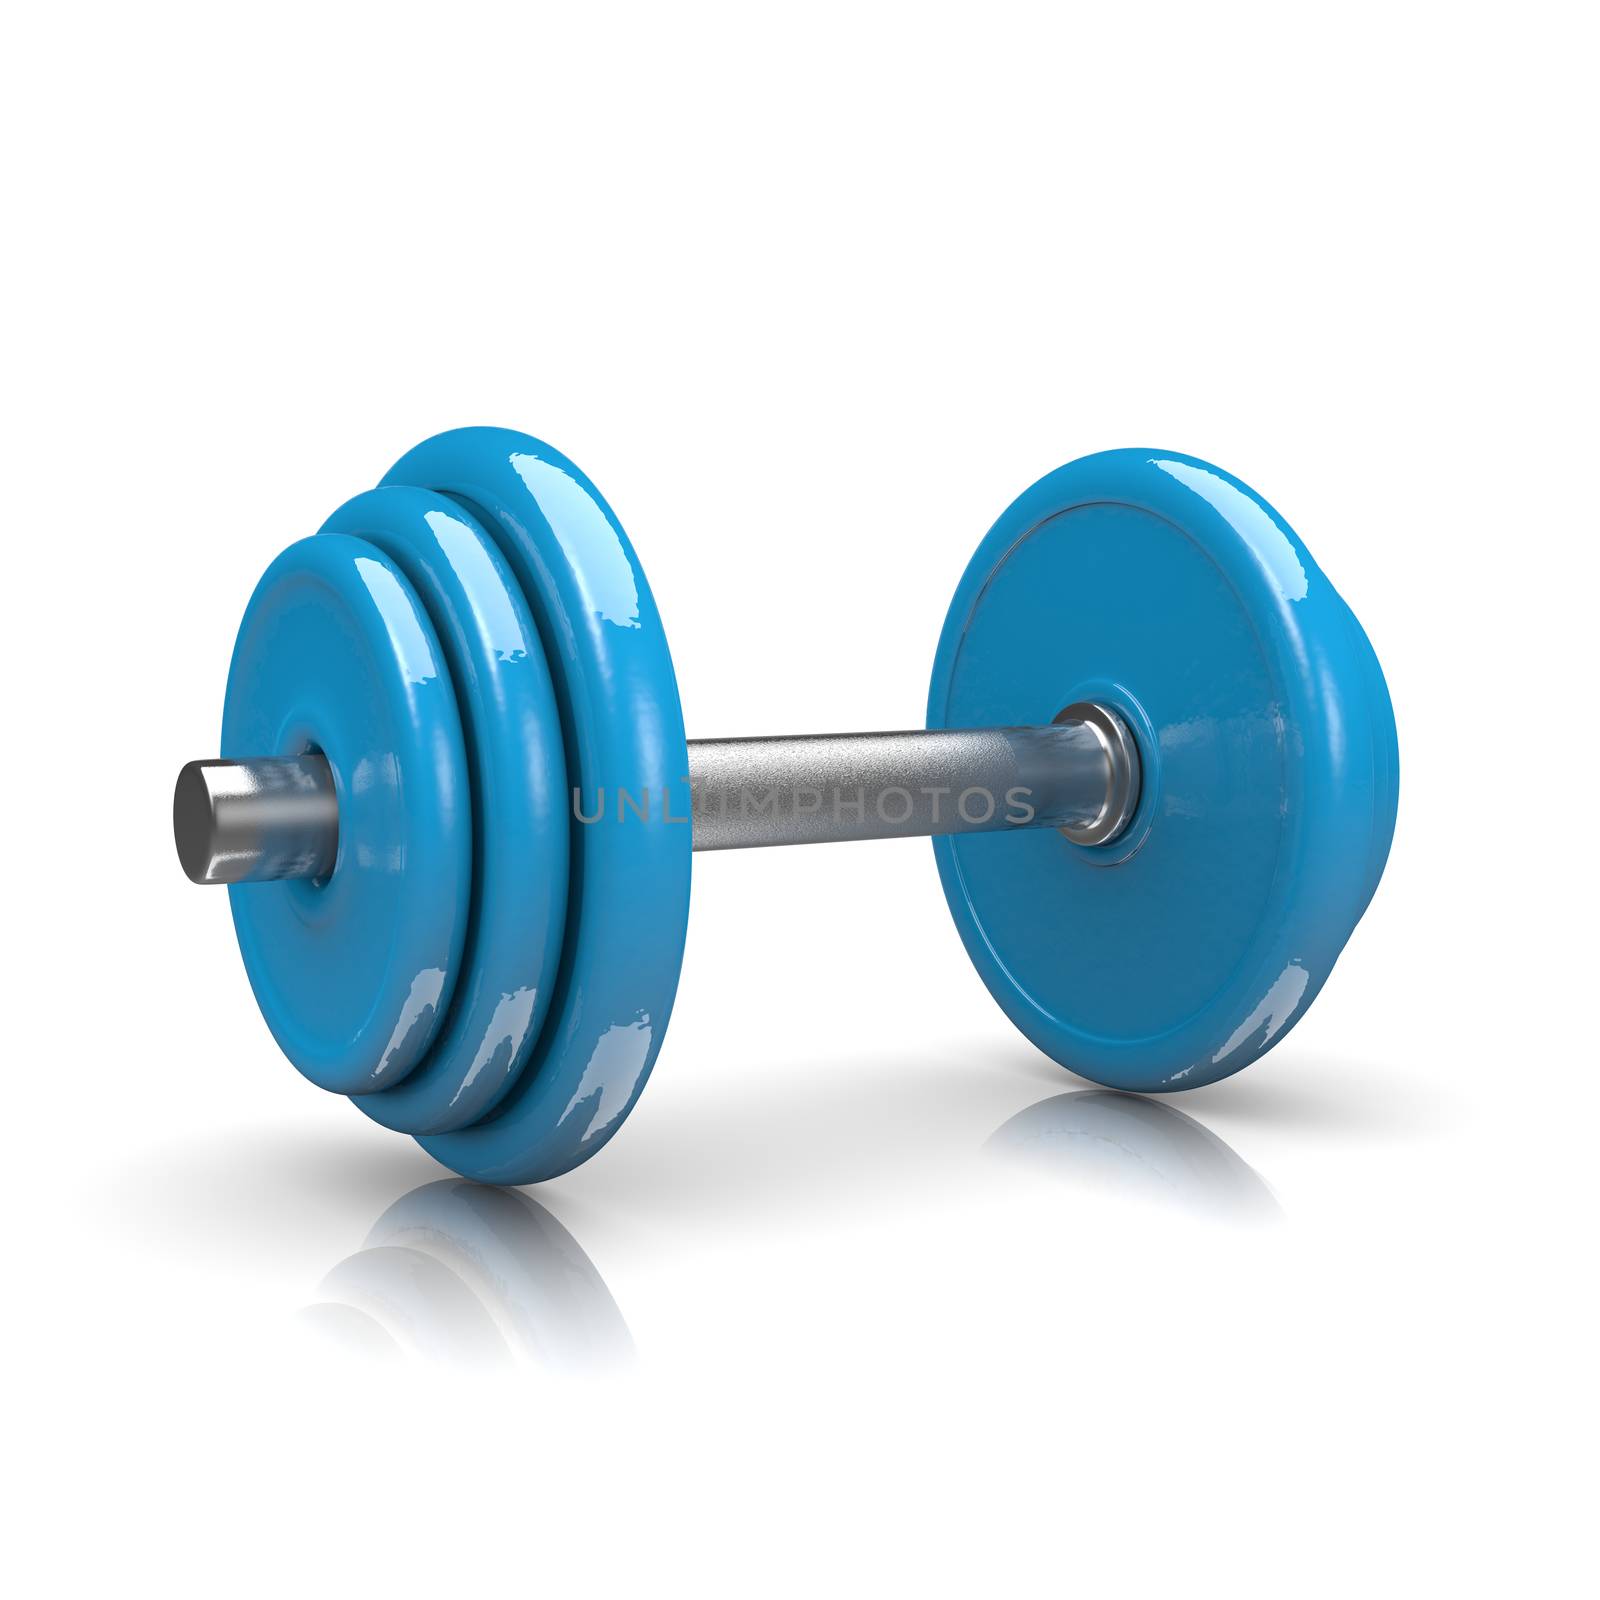 Blue Weight on White Background 3D Illustration